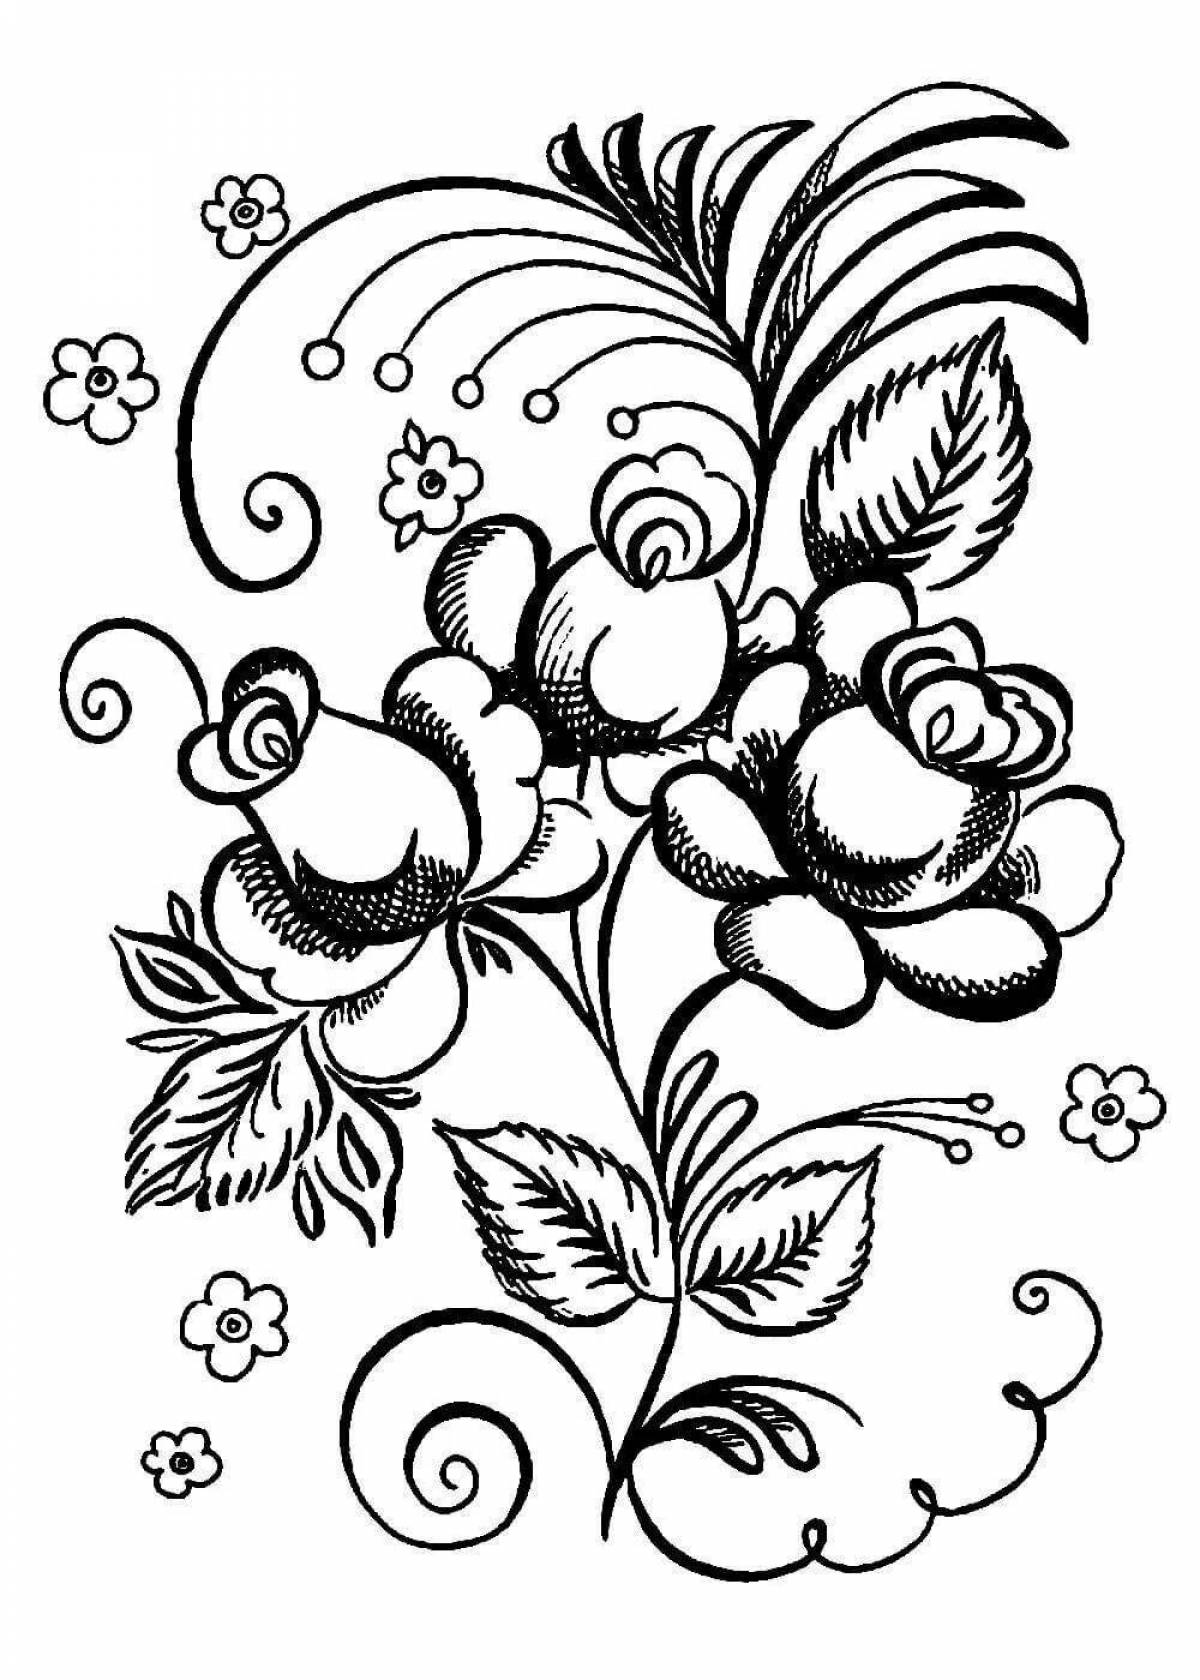 Coloring page charming gzhel tray